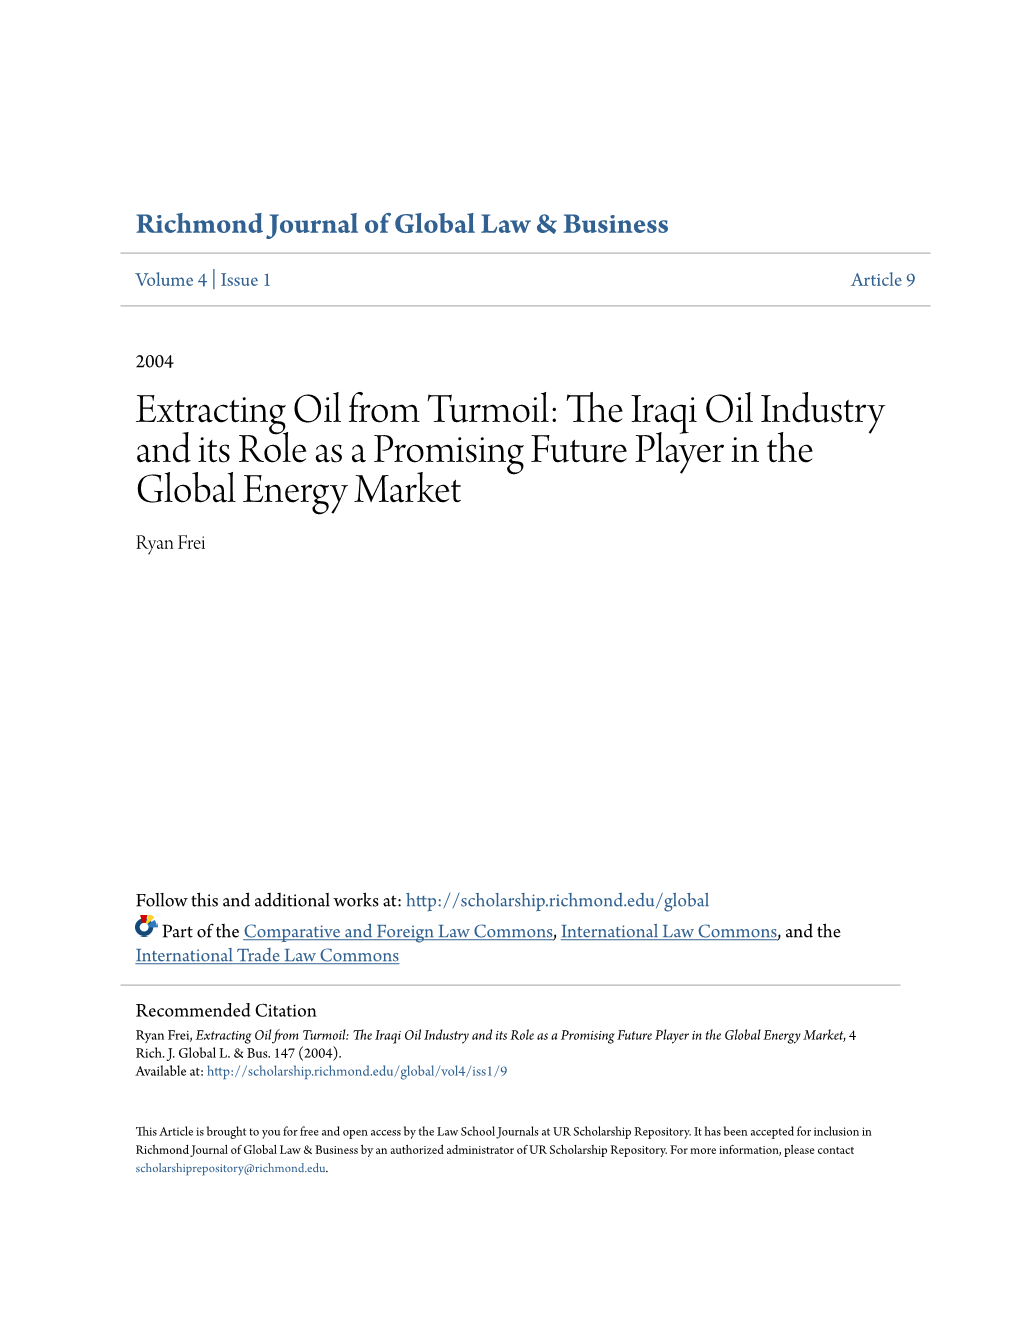 Extracting Oil from Turmoil: the Iraqi Oil Industry and Its Role As a Promising Future Player in the Global Energy Market, 4 Rich